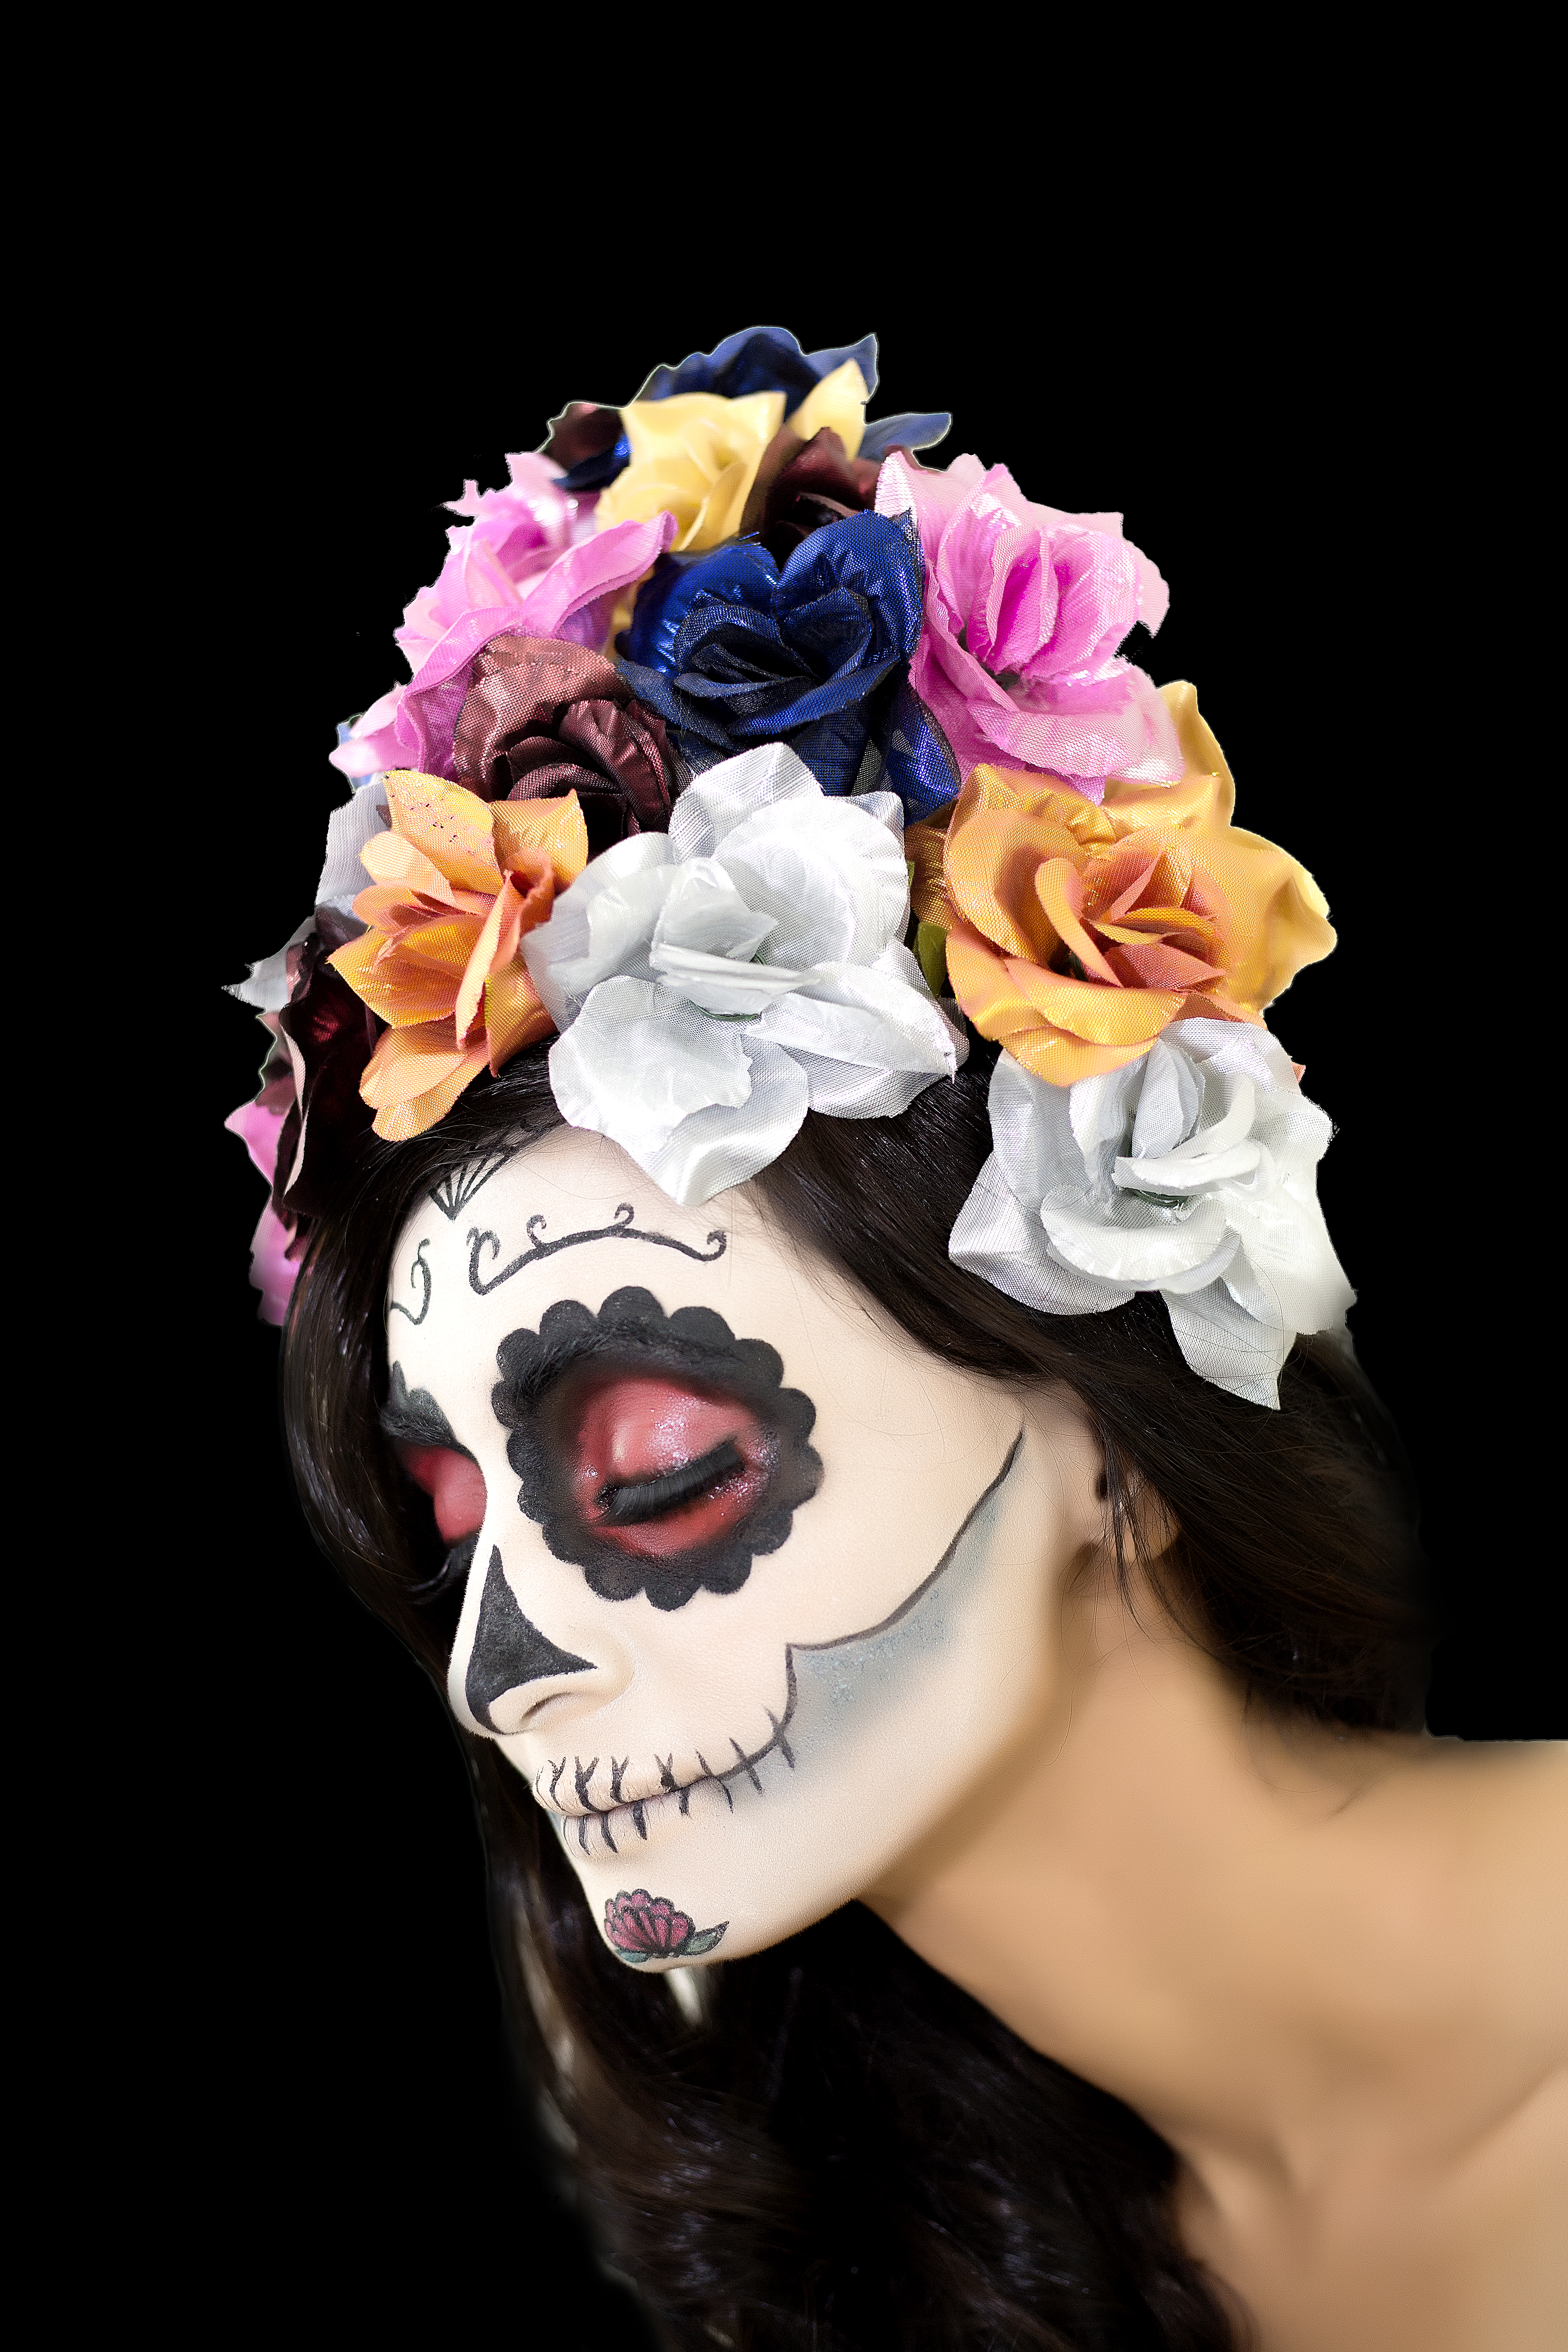 A Step-by-Step Guide to Totally Doable Glam Skeleton Halloween Makeup